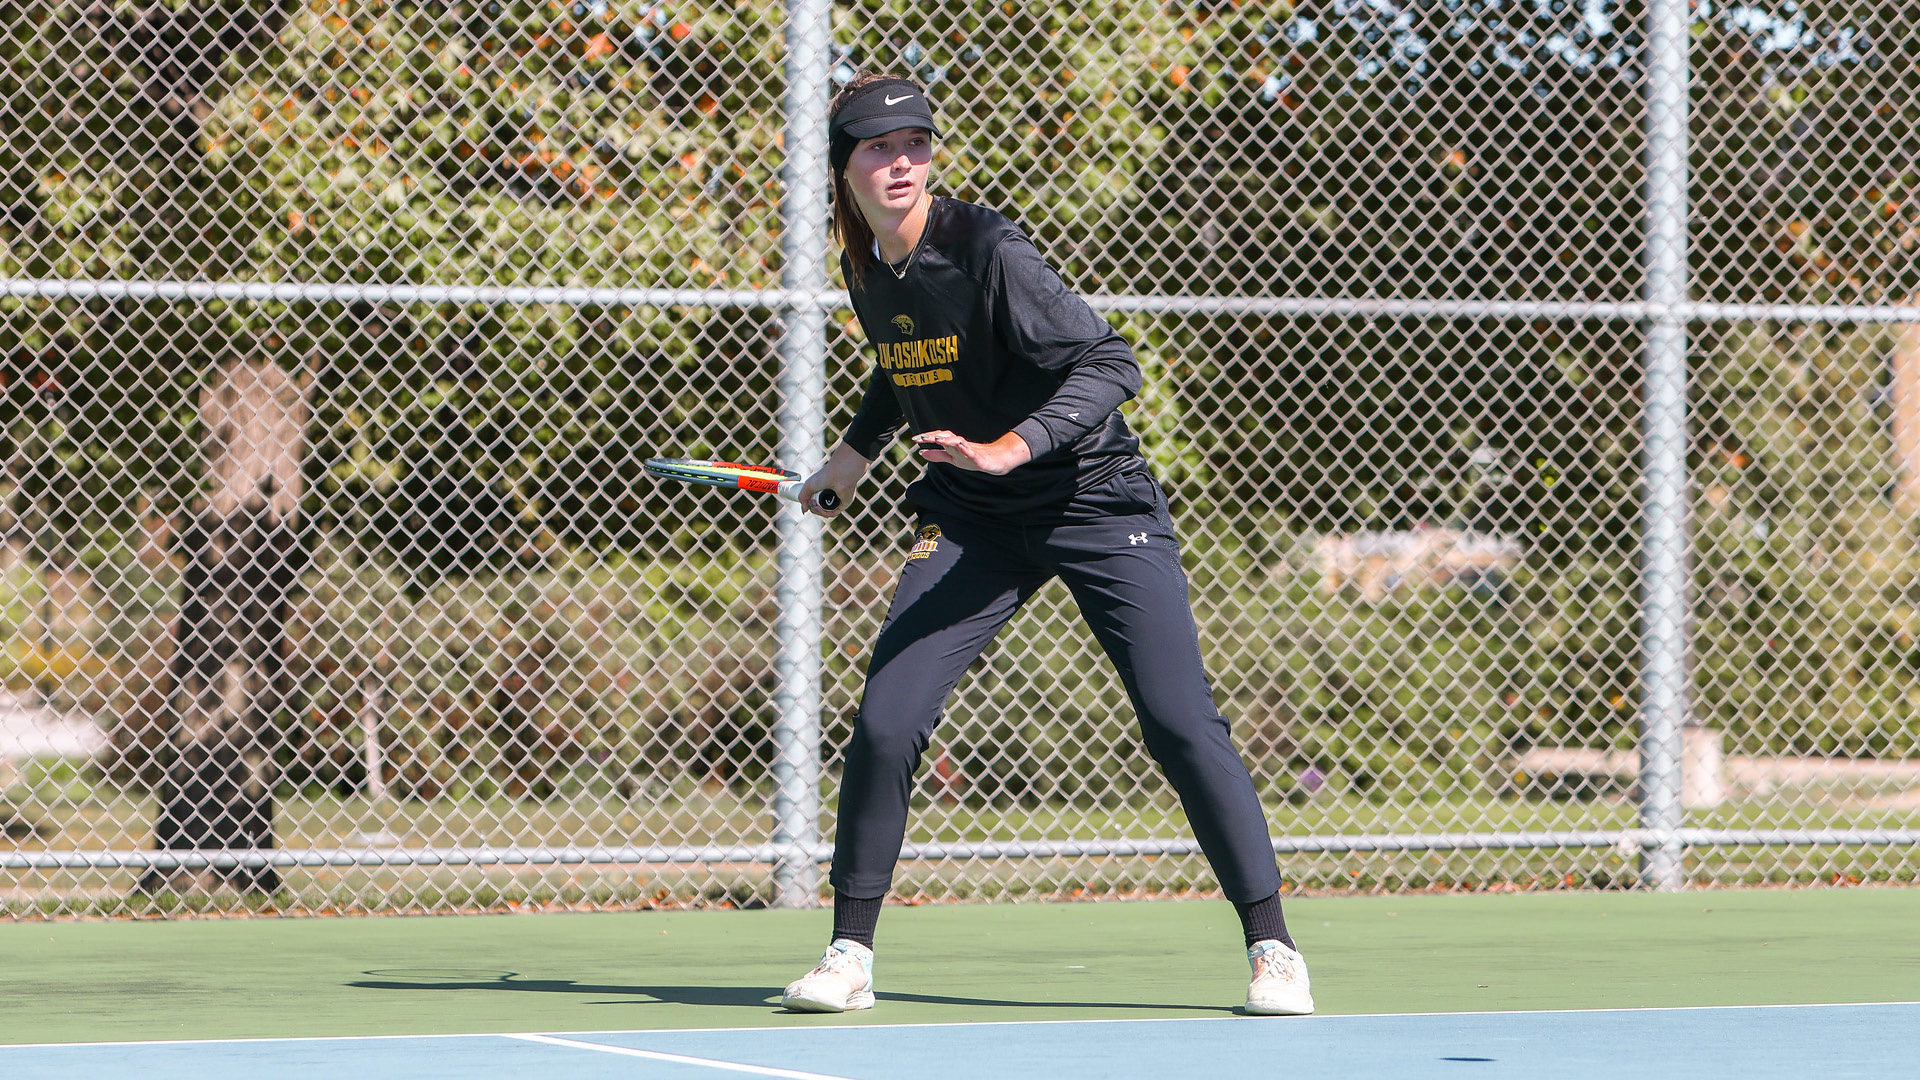 Kayla Gibbs and partner Jameson Gregory earned an 8-5 win in the No. 3 doubles against the Blugolds